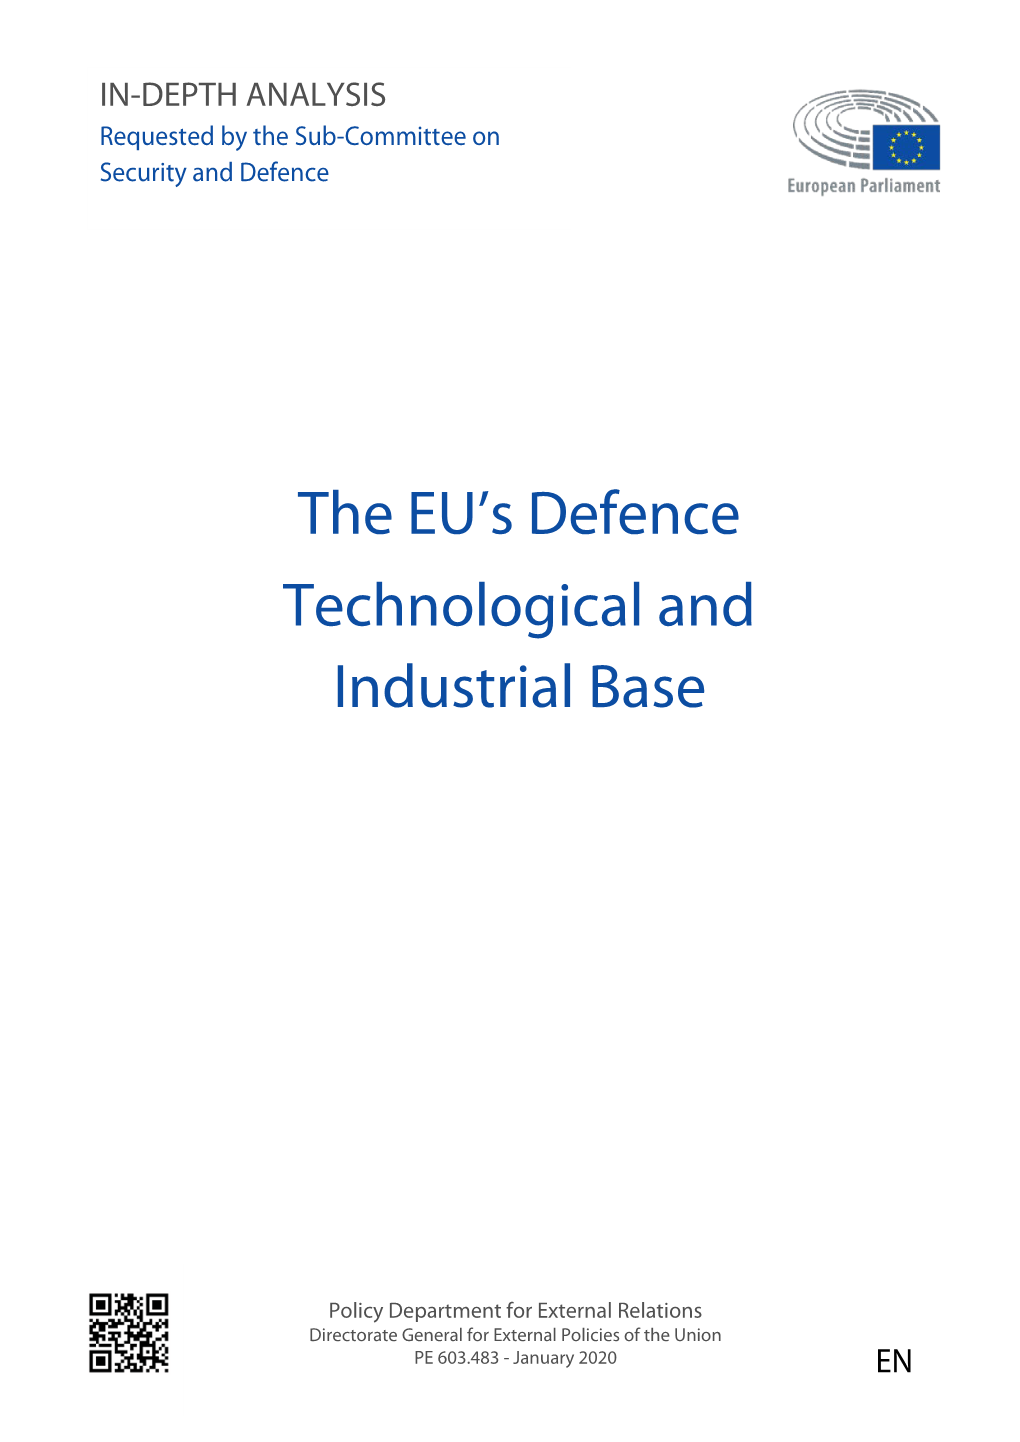 The EU's Defence Technological and Industrial Base